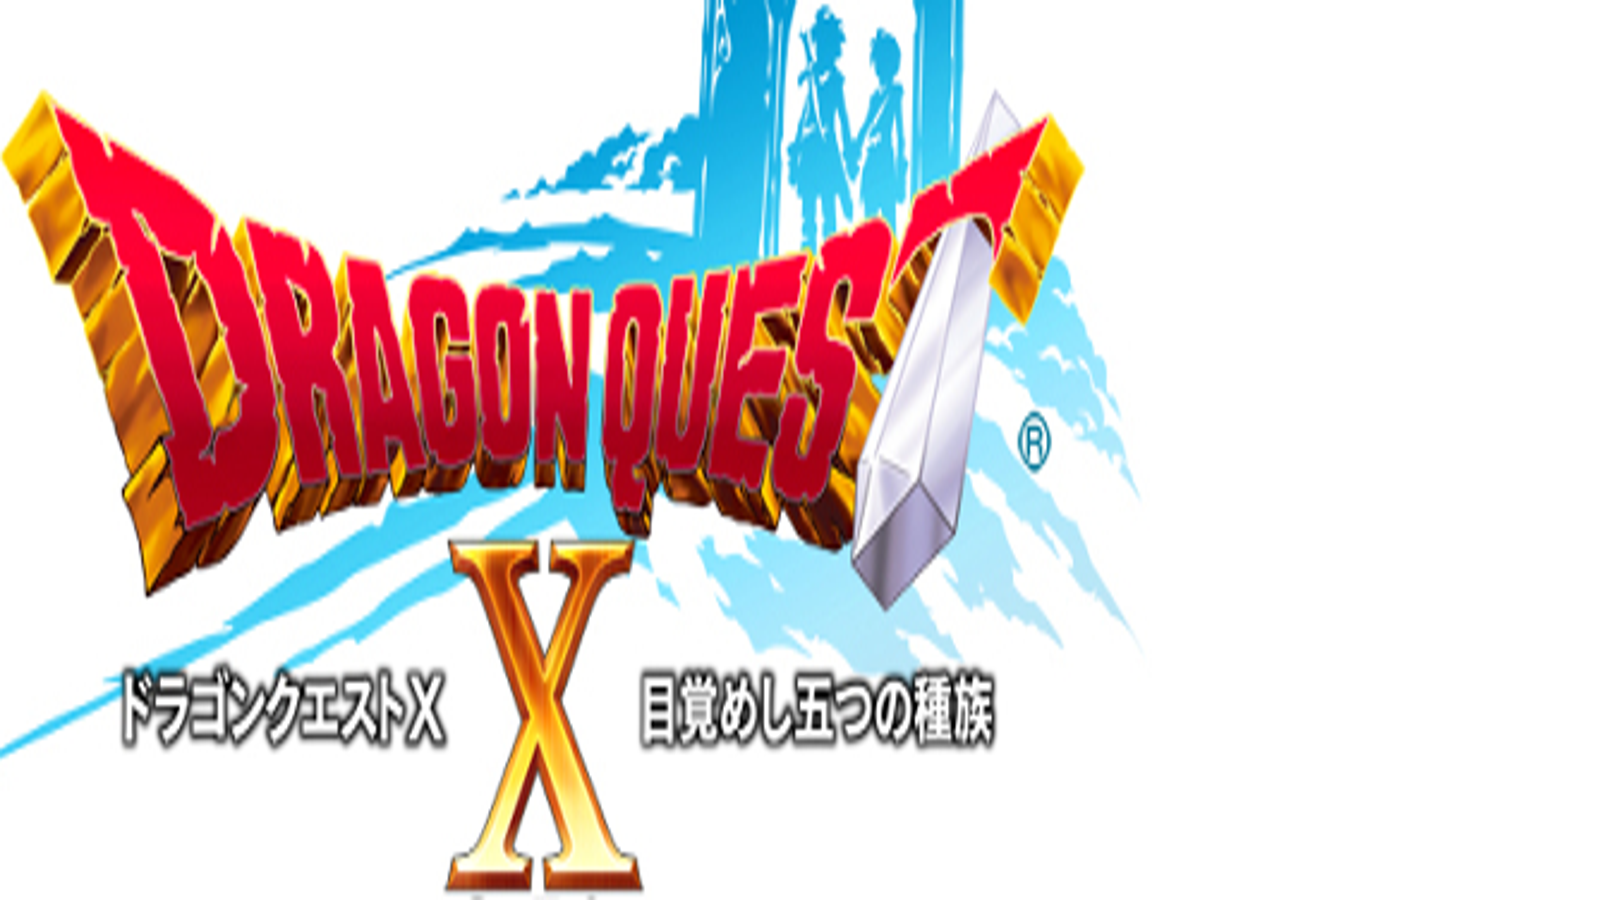 Dragon Quest X Has 2 Free Hours a Day -- You Know, For Kids